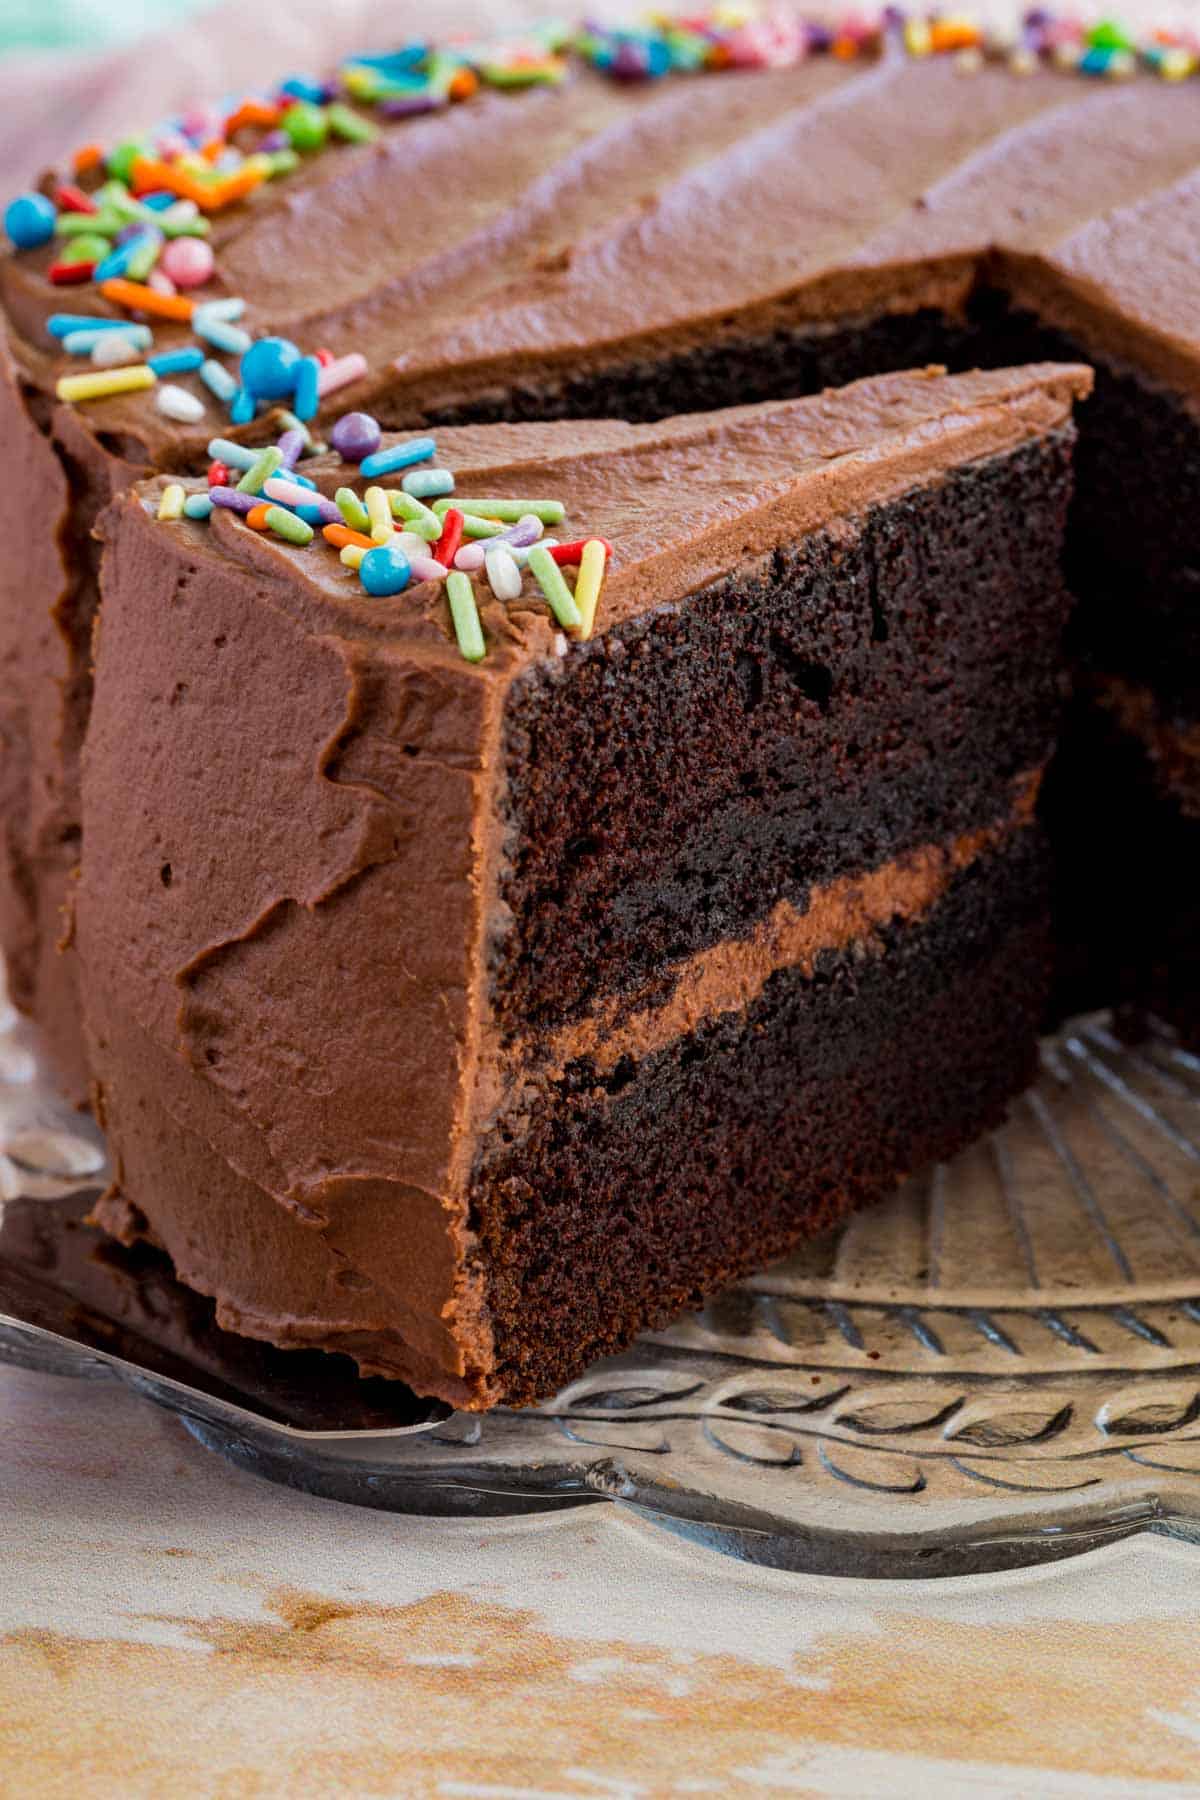 A slice of gluten-free chocolate layer cake being served from the full cake.